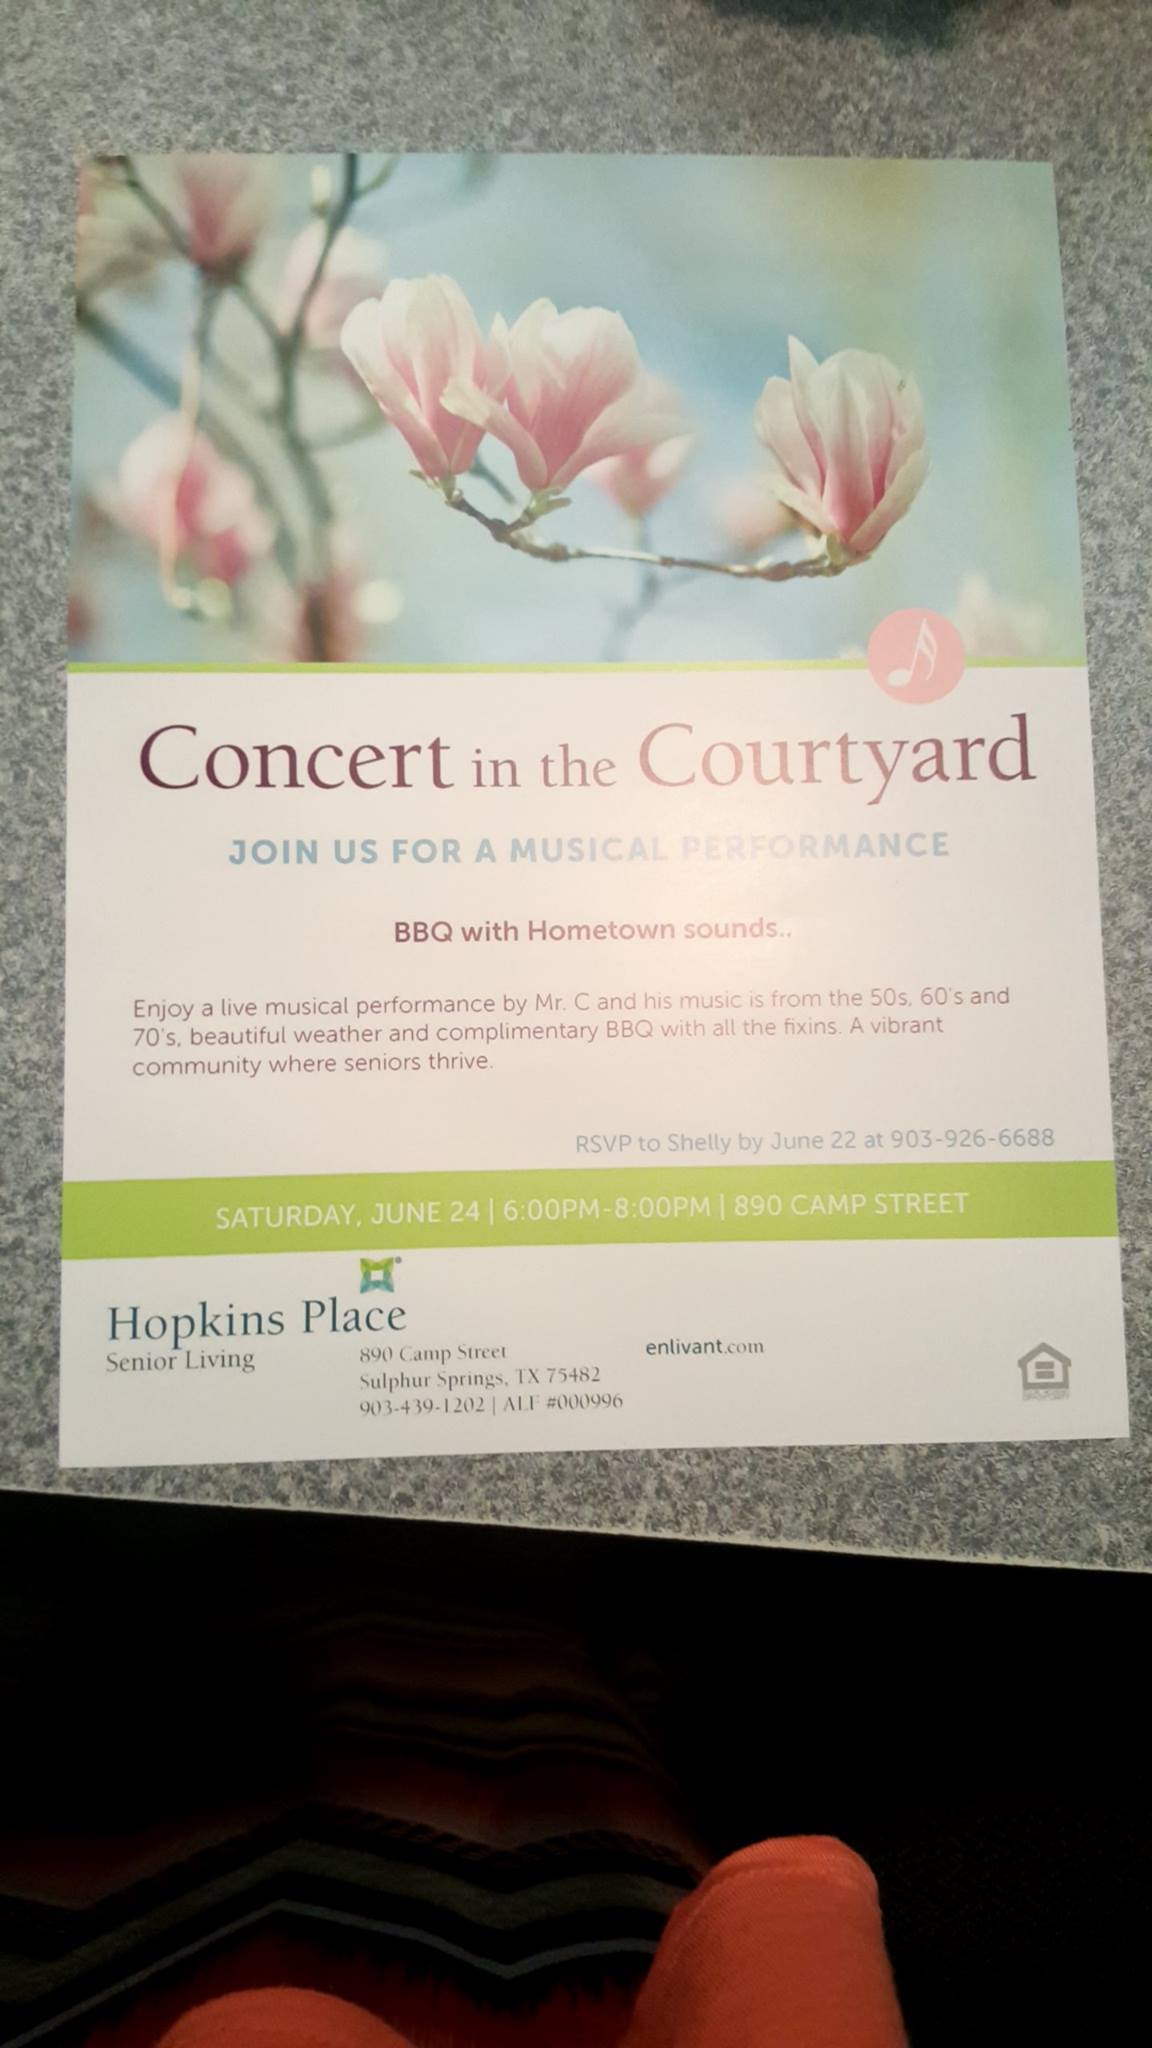 Hopkins House will be Hosting a Free Dinner and Concert on Saturday, June 24th